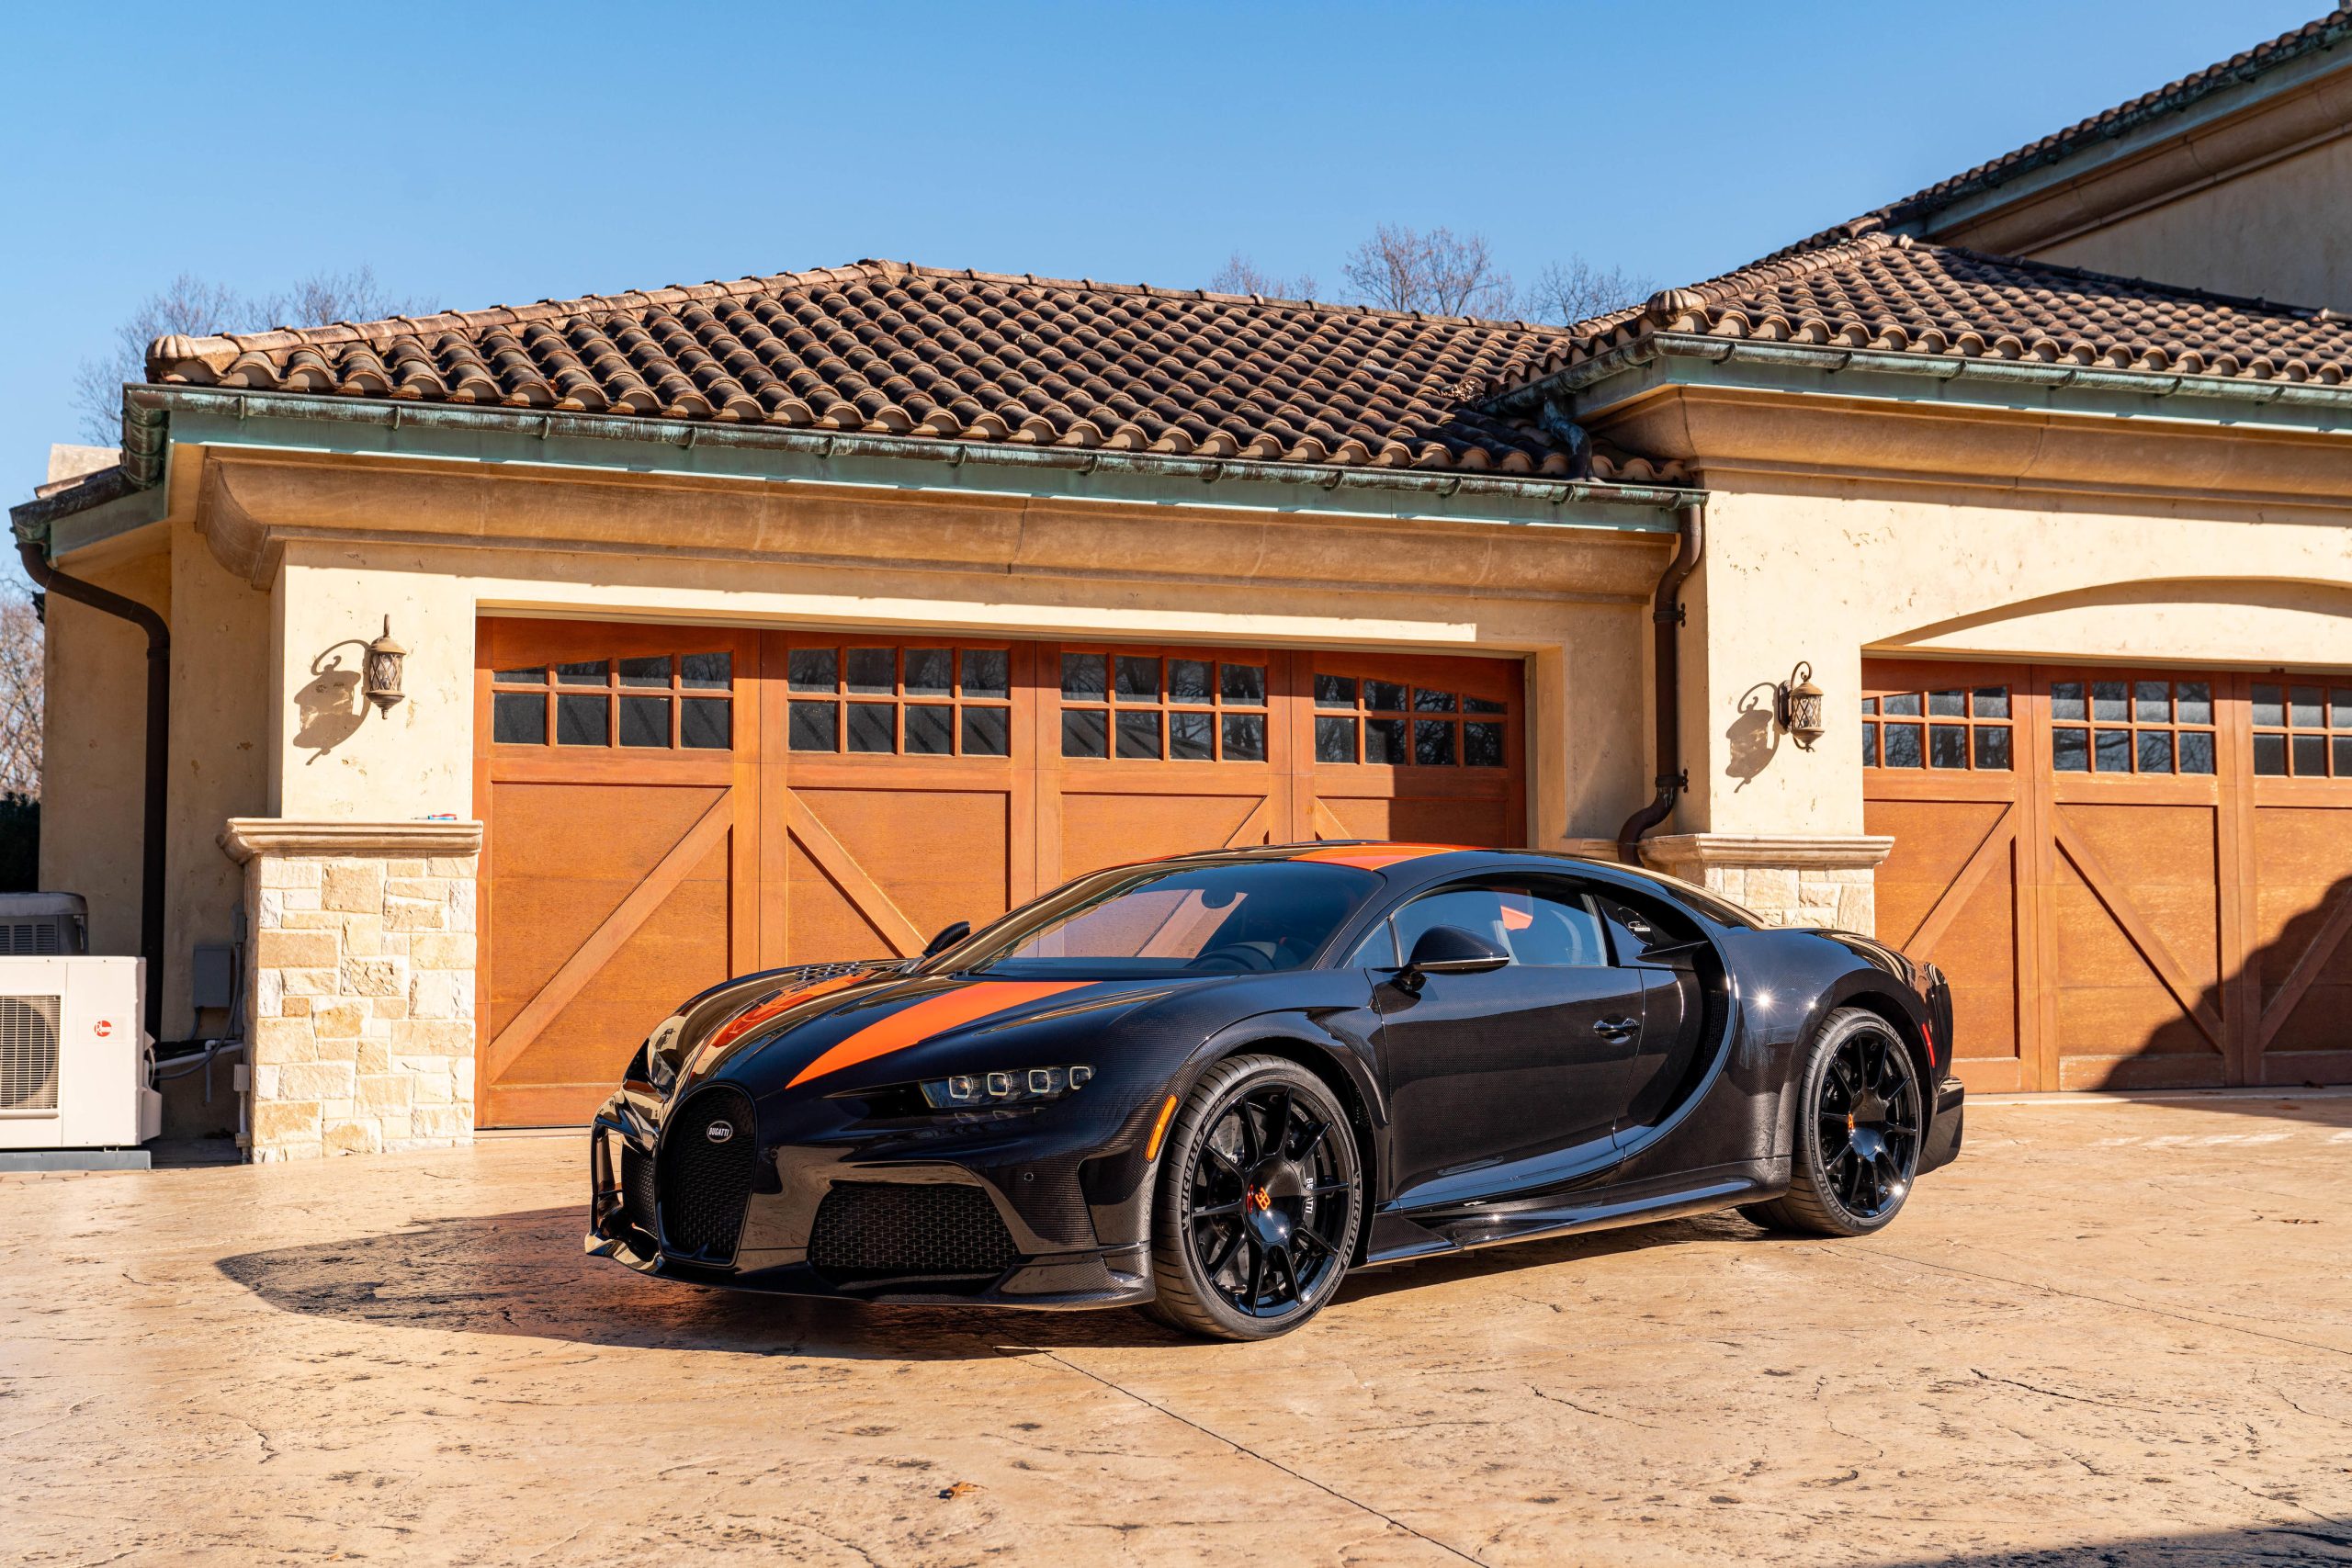  Bugatti Chiron Super Sport 300+ To Be Auctioned By Bonhams 